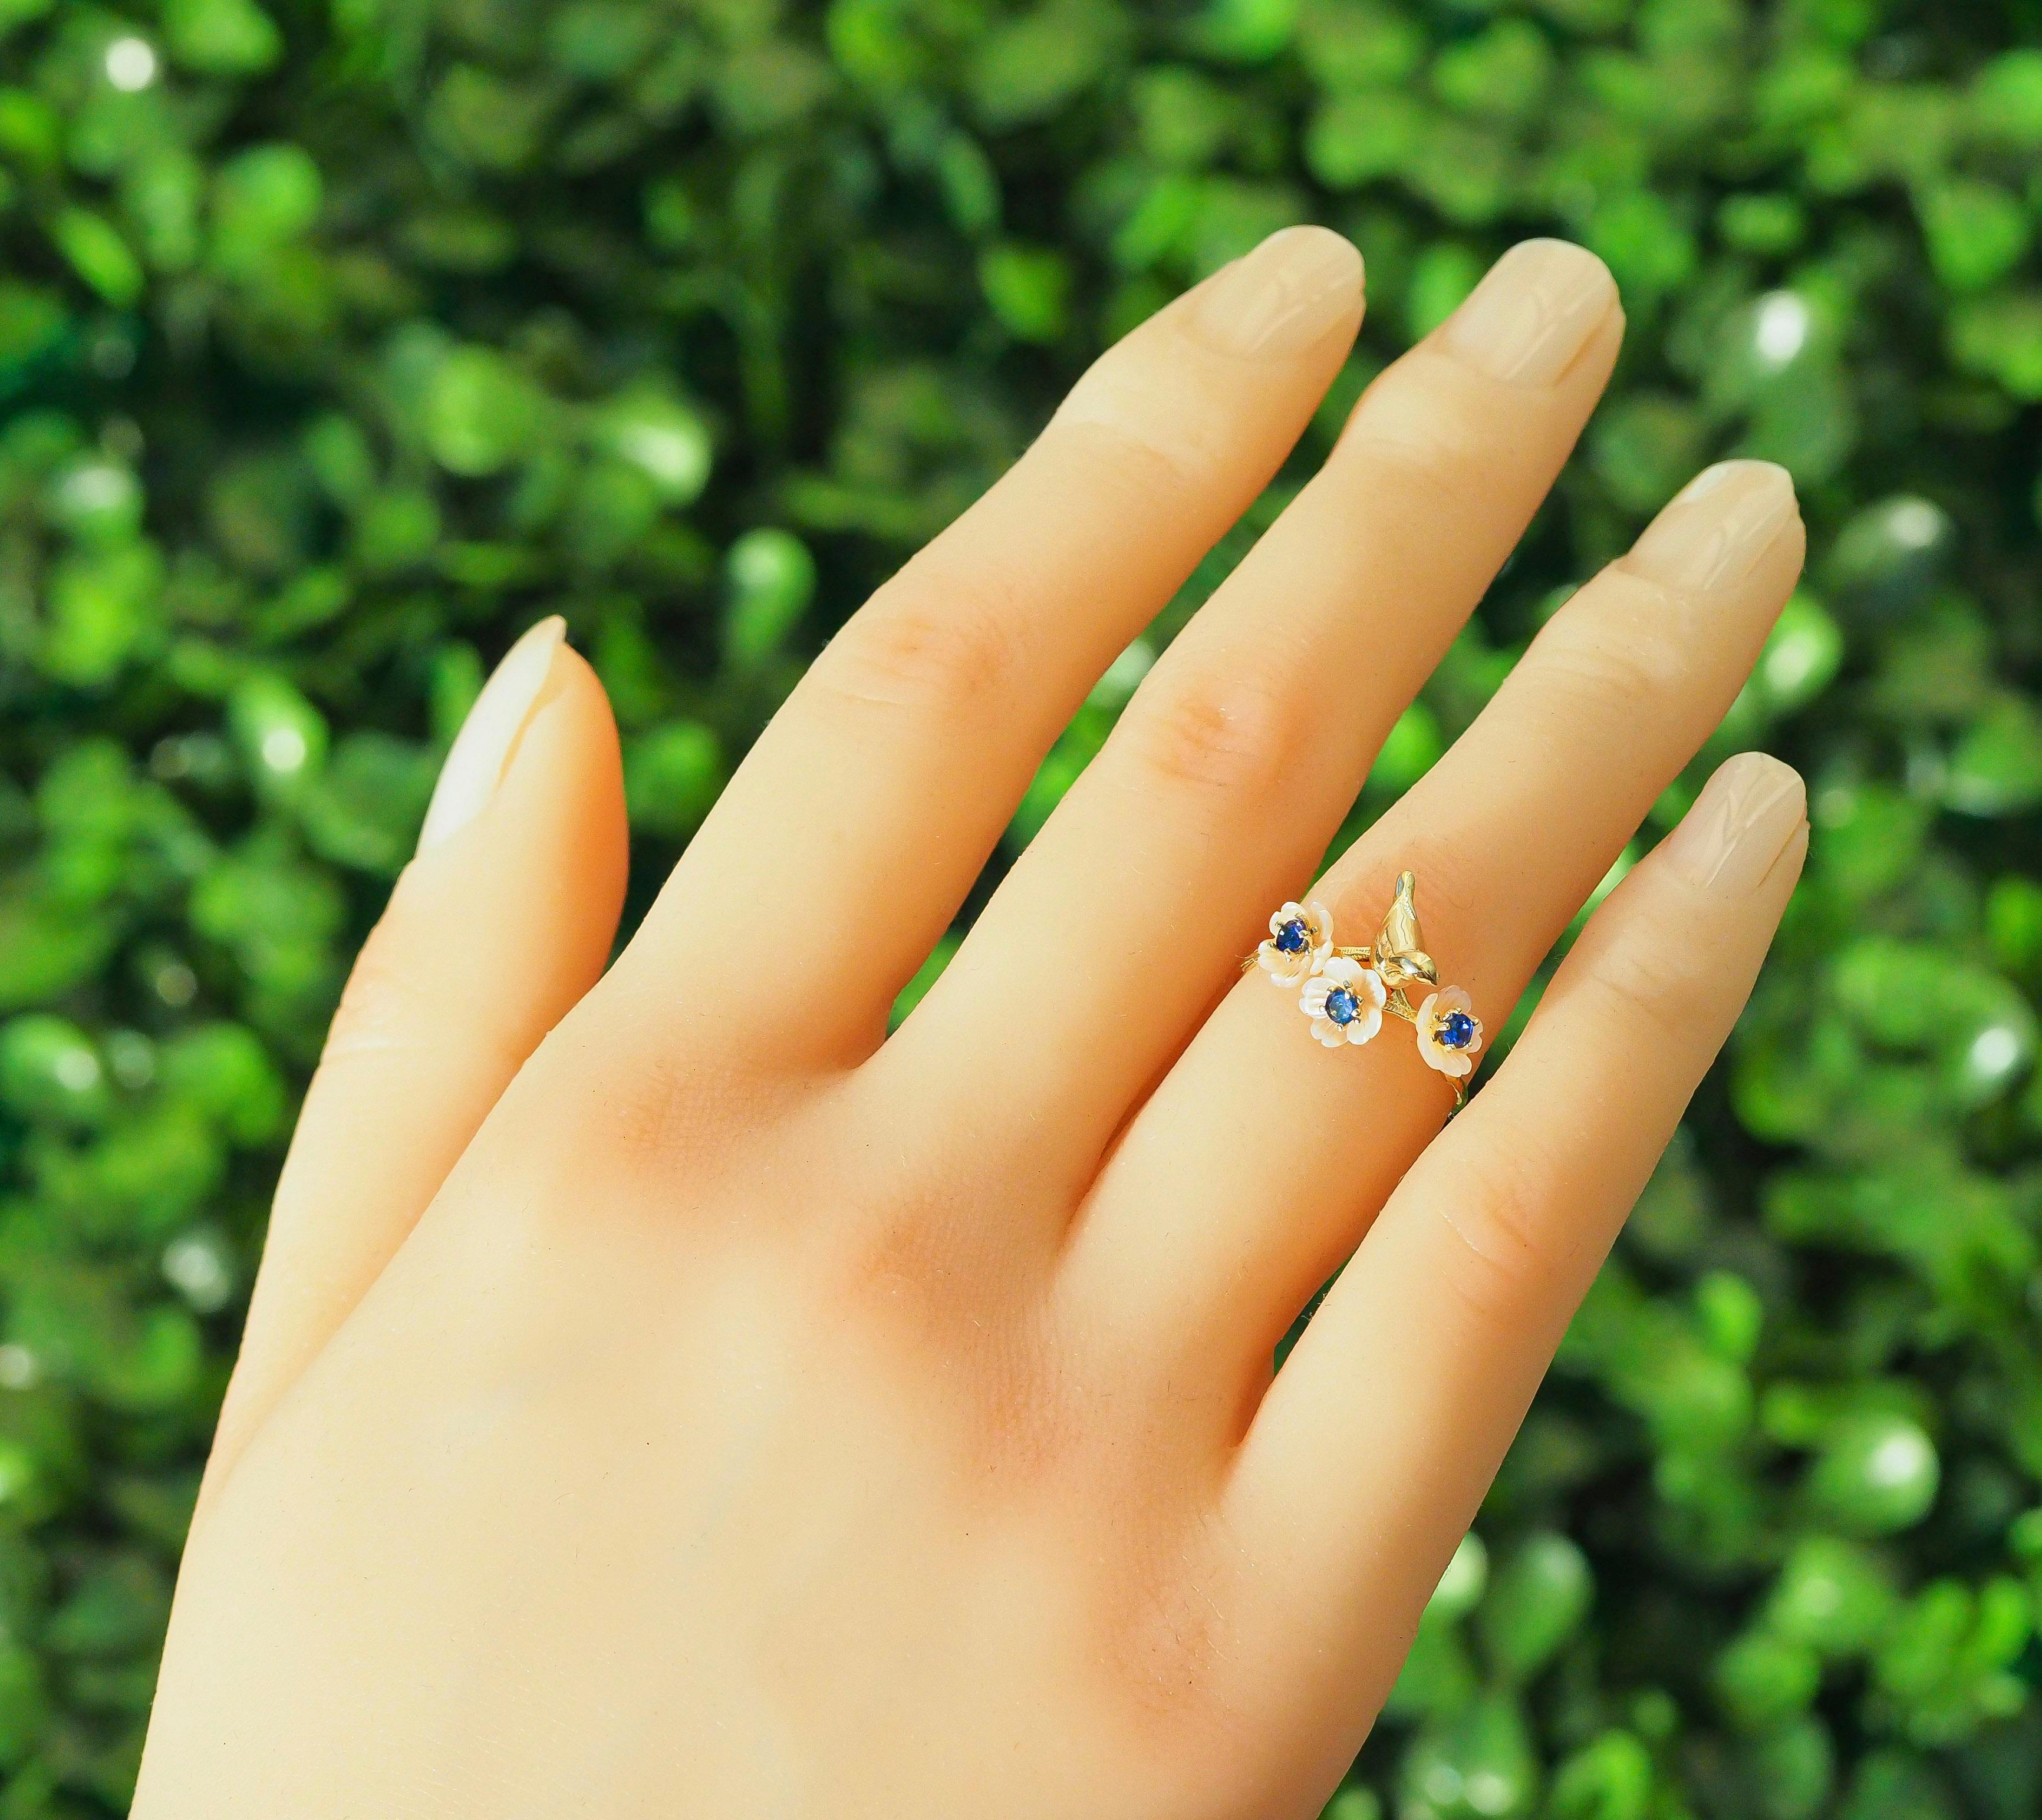 For Sale:  14k Gold Bird on Branch Ring. Sapphires and Carved Mother of Pearl ring! 14